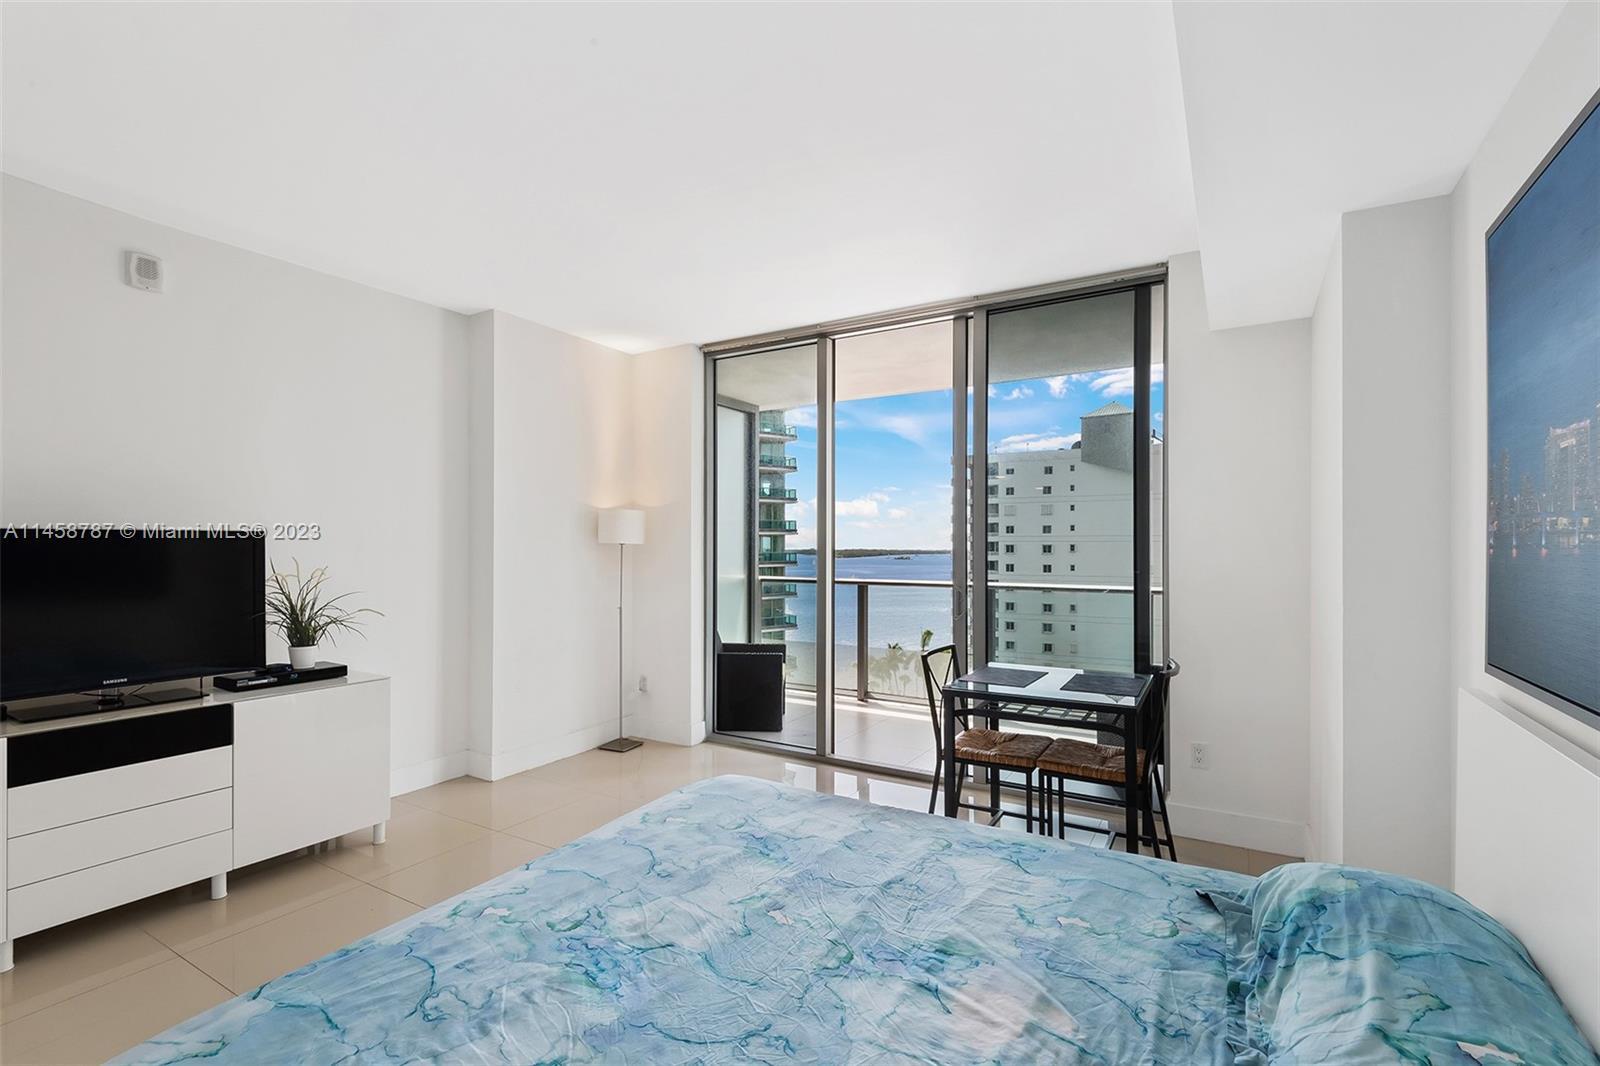 Beautiful Studio with floor to ceiling windows overlooking the bay and the gorgeous Miami skyline. B